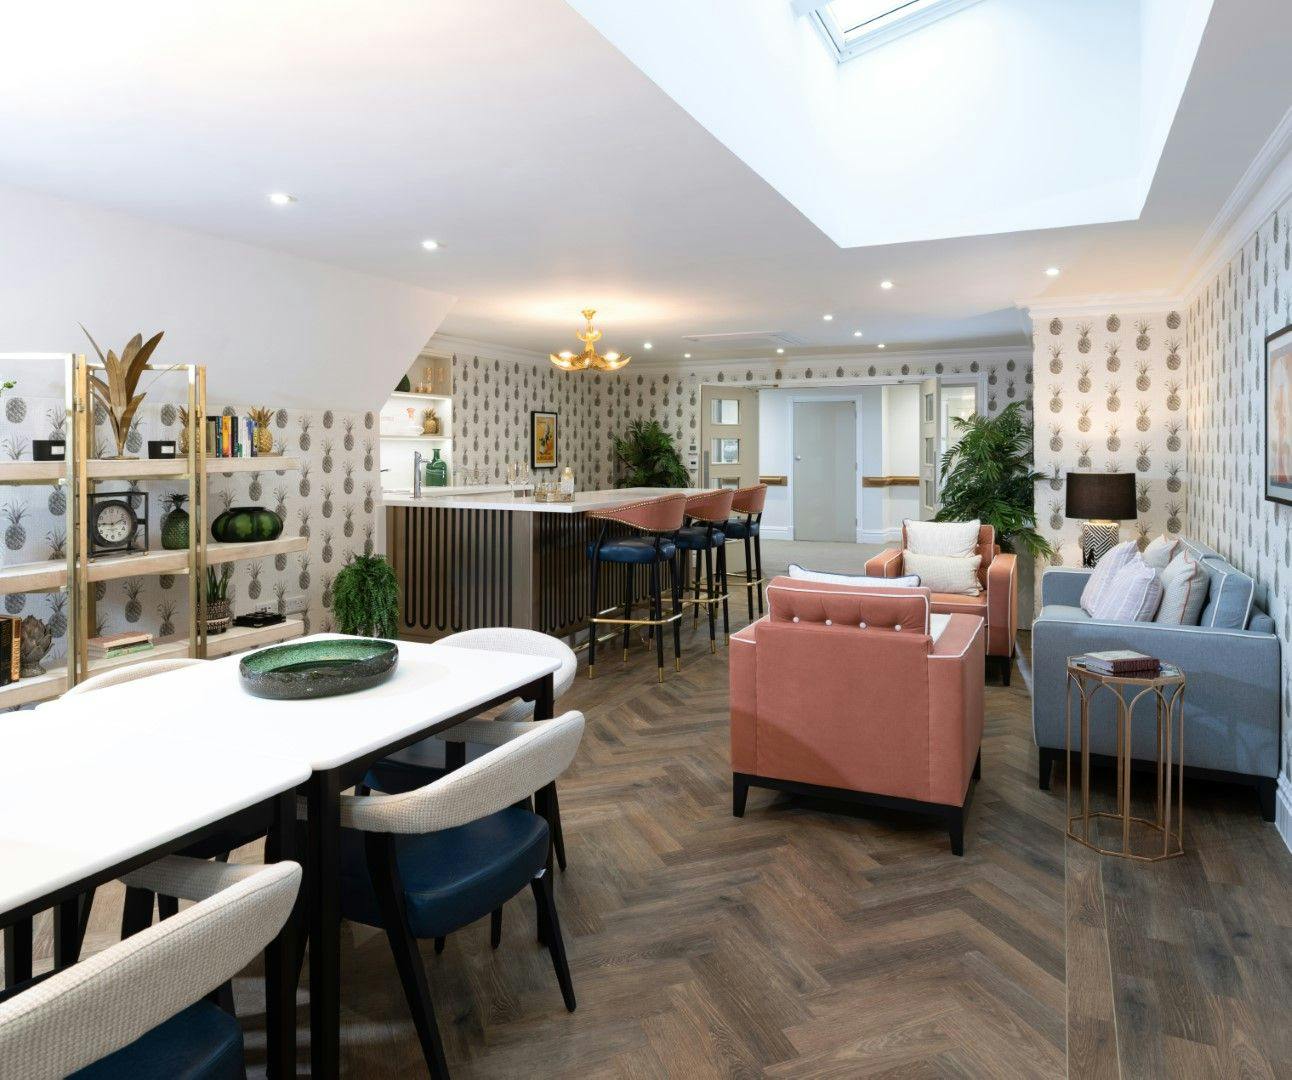 Communal Area at Hutton View Care Home in Brentwood, Essex